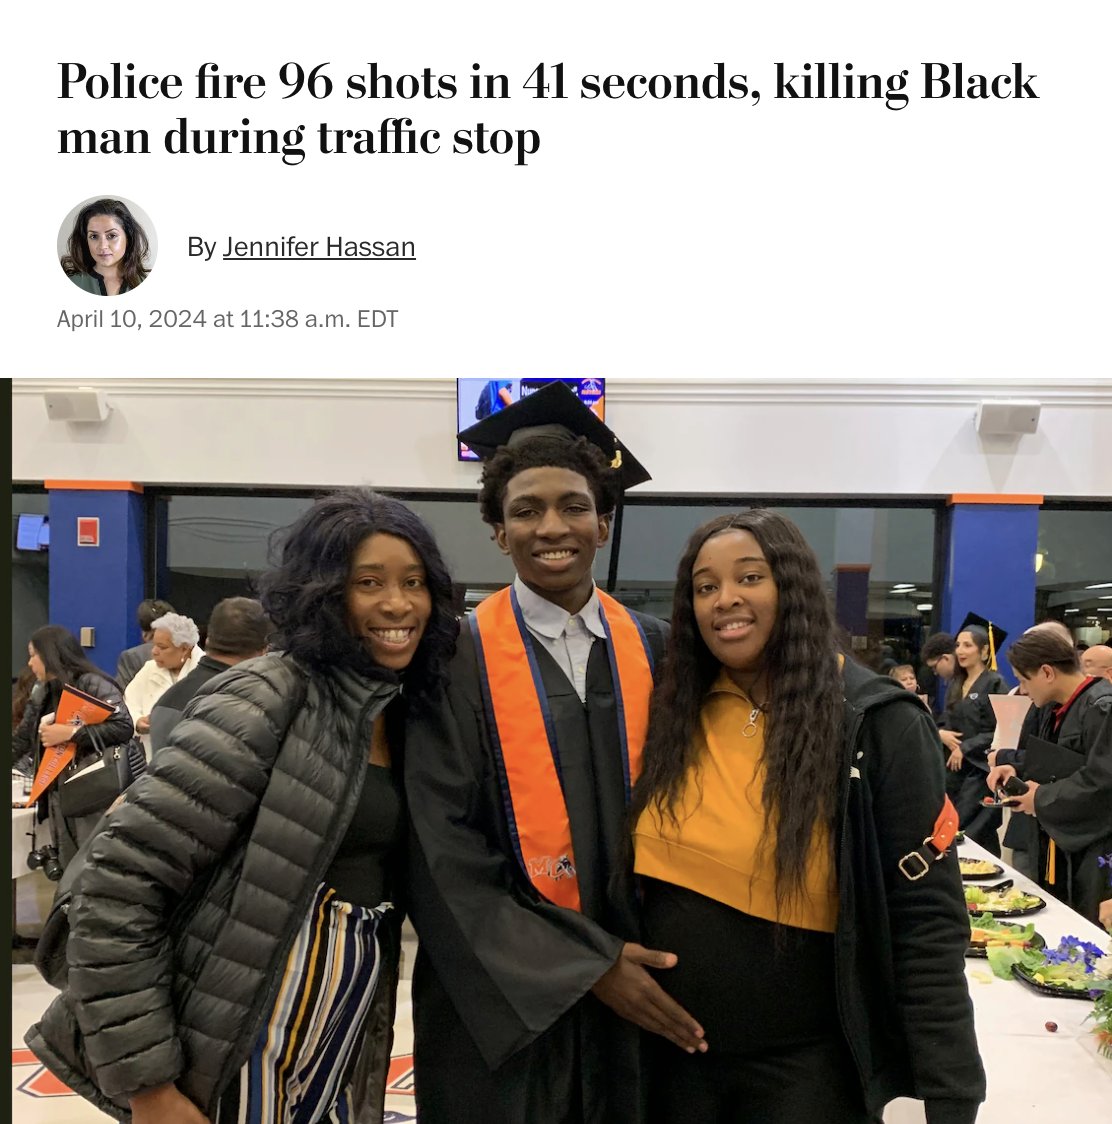 Biden promised George Floyd's family that he wouldn’t just become 'another hashtag.' Then he increased Trump's police funding and militarization, resulting in record-breaking cop m*rders. Four plainclothes cops just shot a black man ~100 times for not wearing a seatbelt.